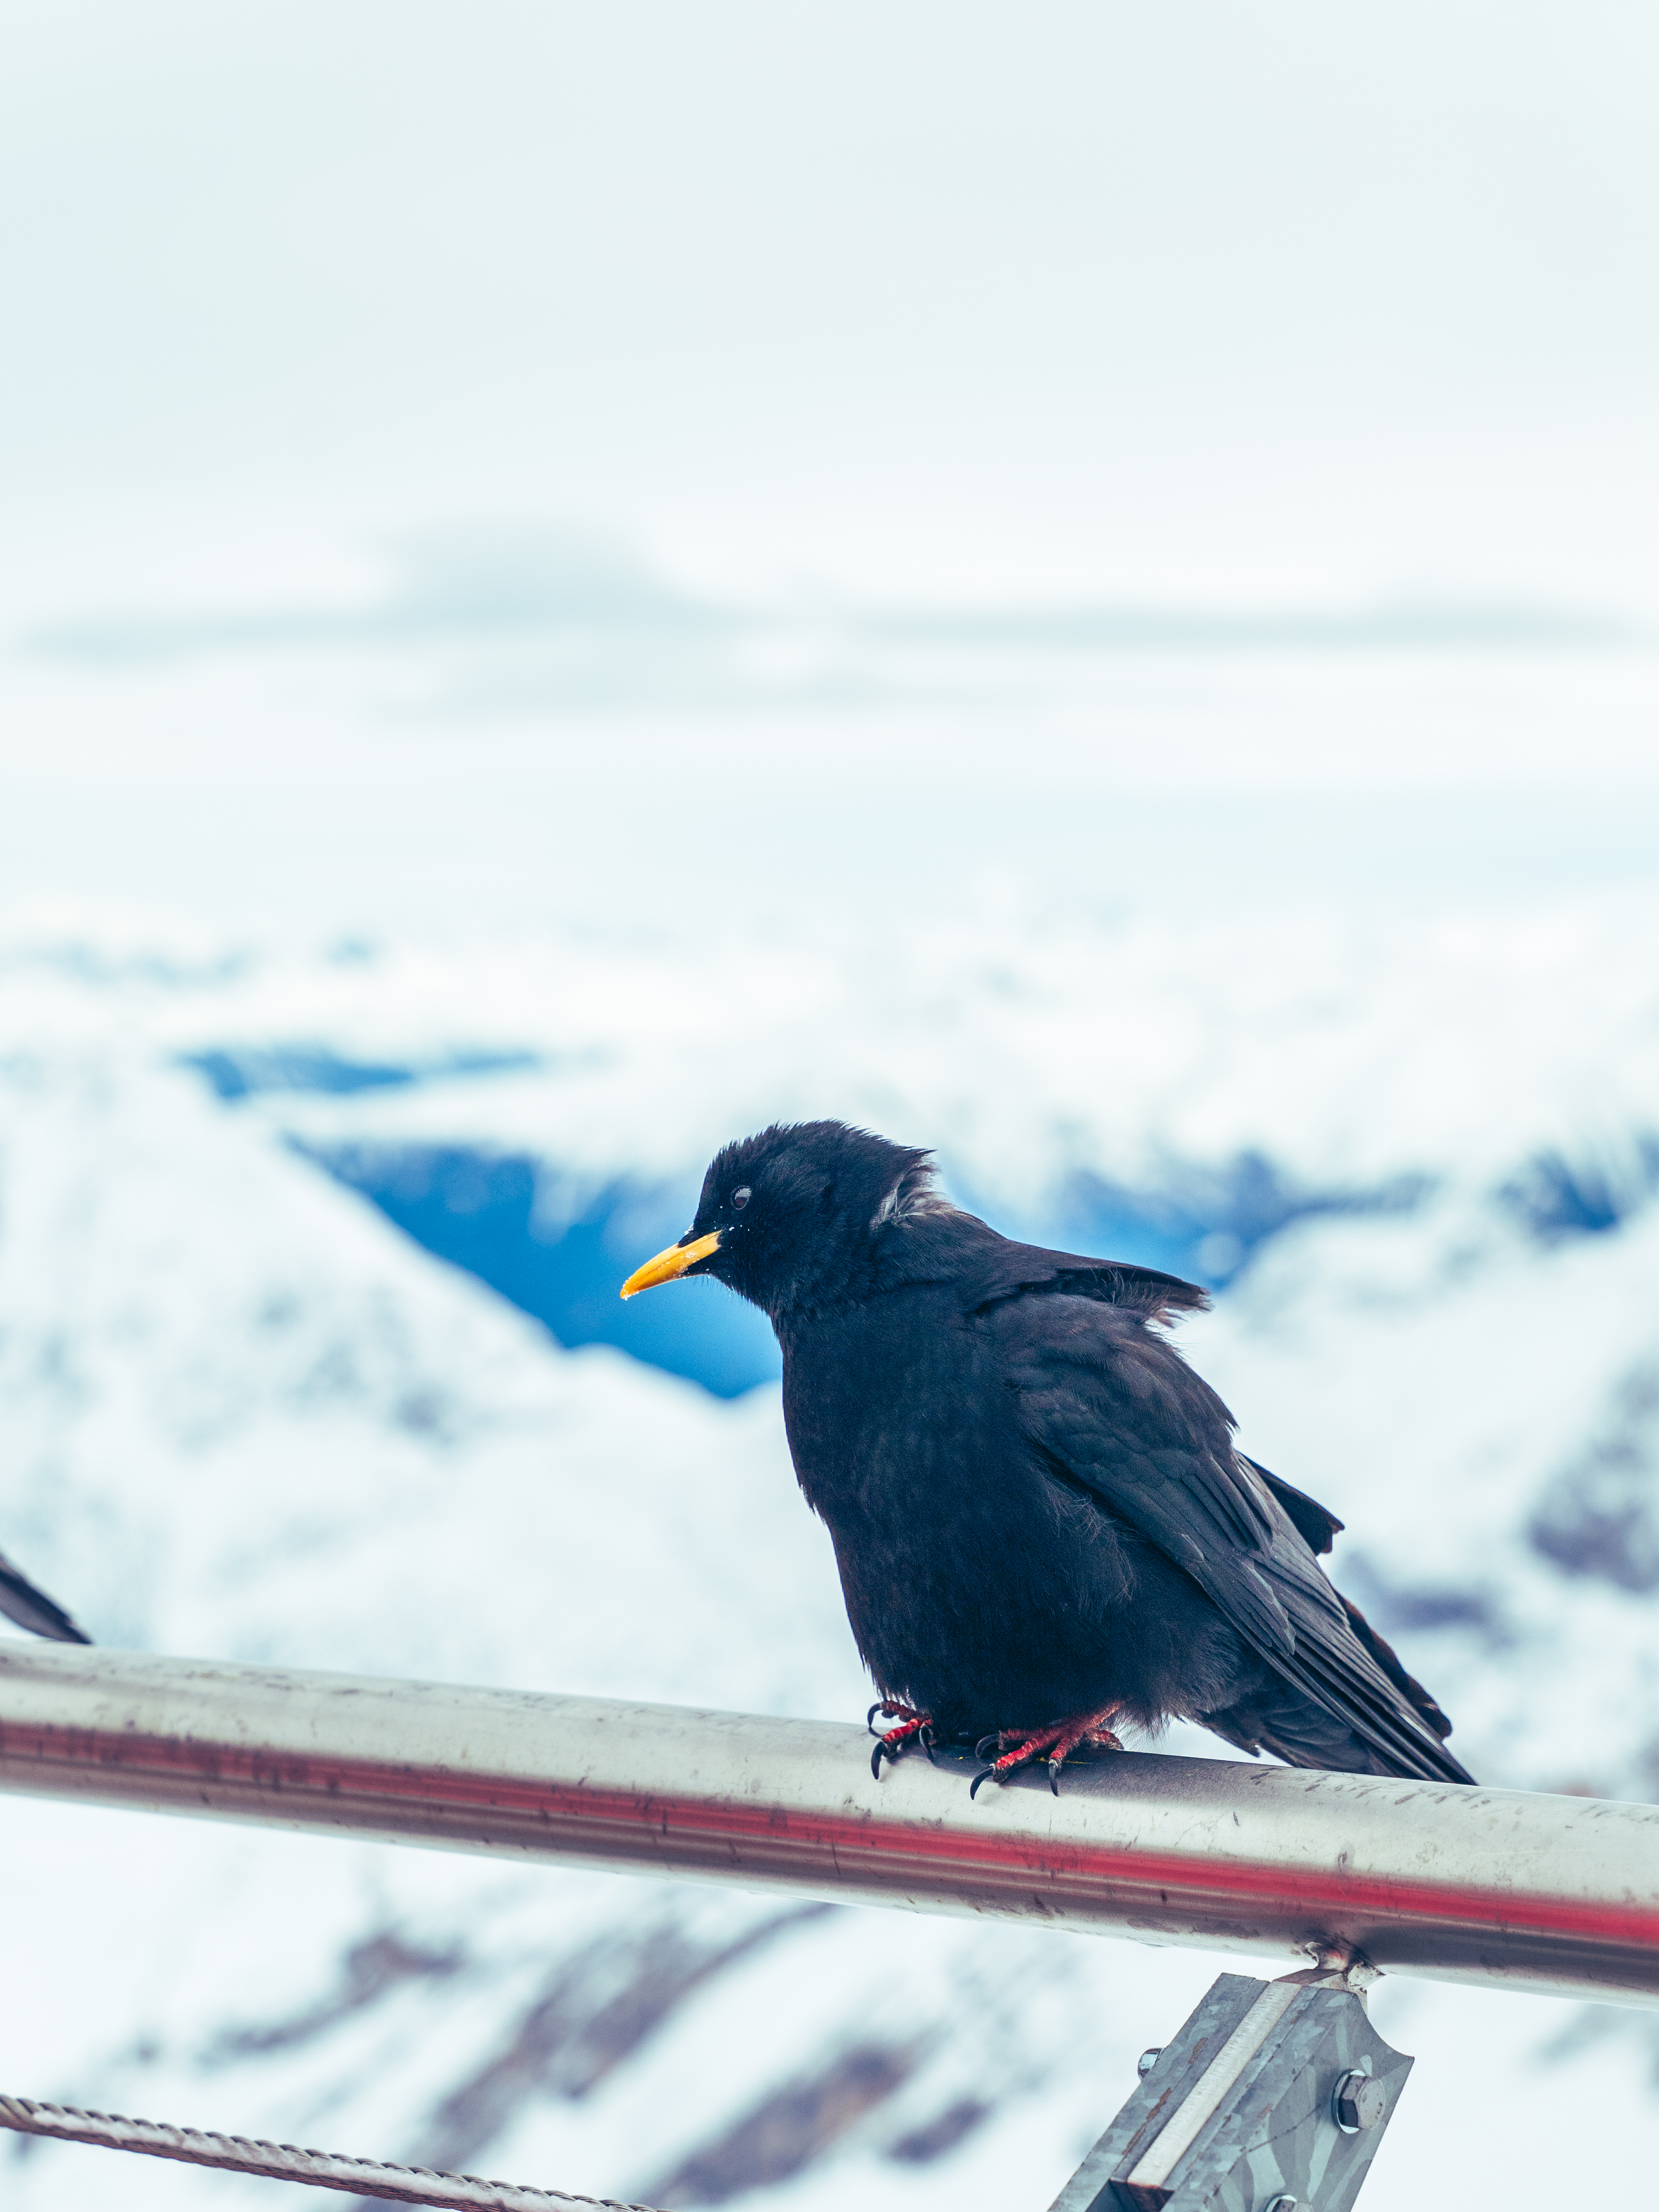 General 3750x5000 Zugspitze snow birds mountains Germany closeup portrait display cold depth of field beak blurry background fur wings animals